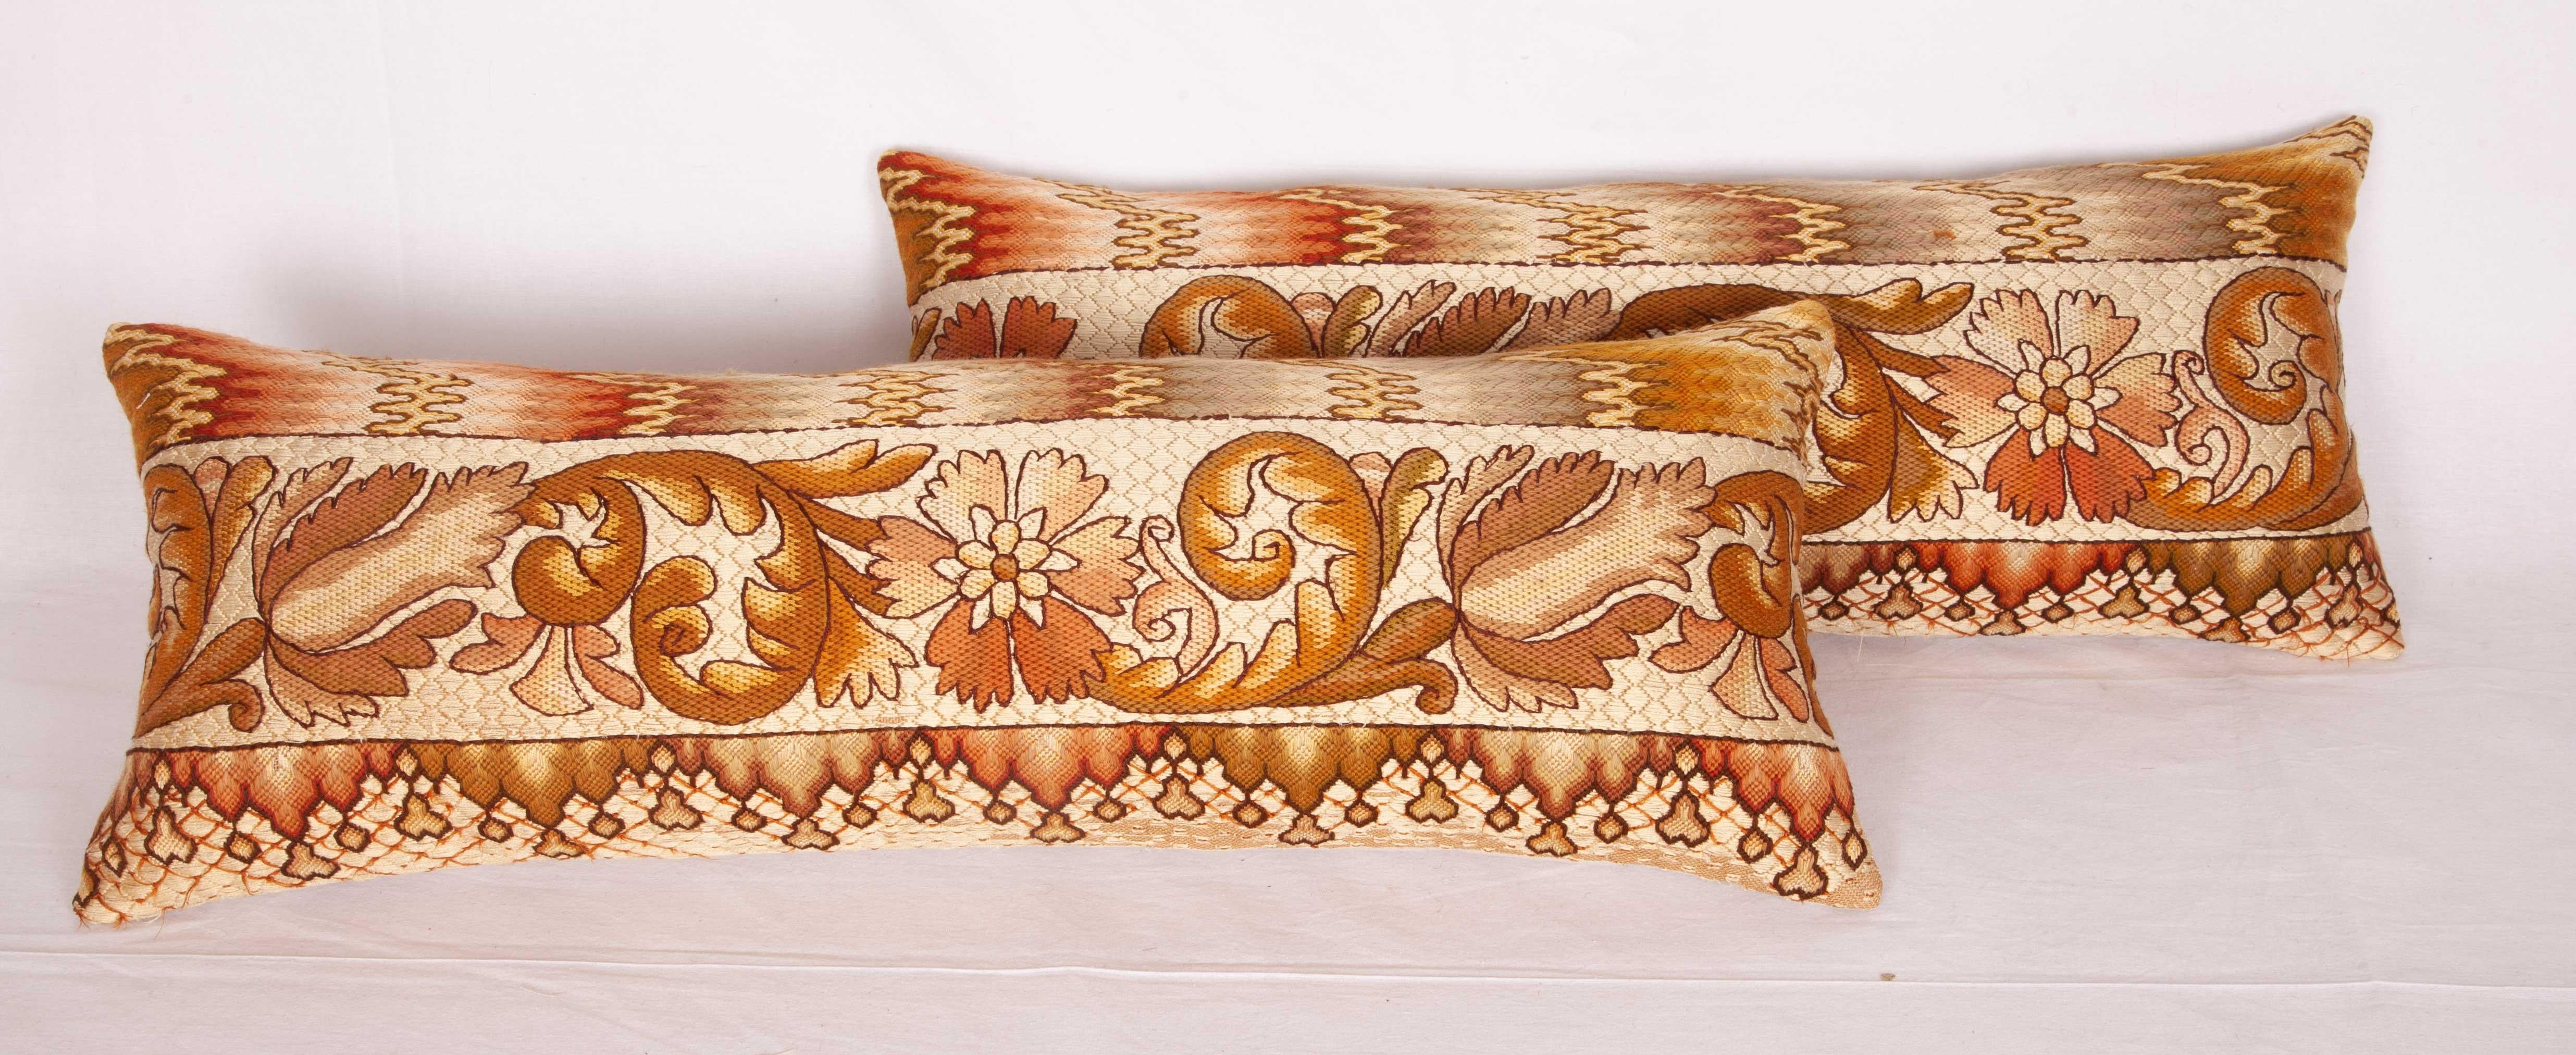 Embroidered Lumbar Pillow Cases Fashioned from a European Flame Stitch Textile, 19th Century For Sale